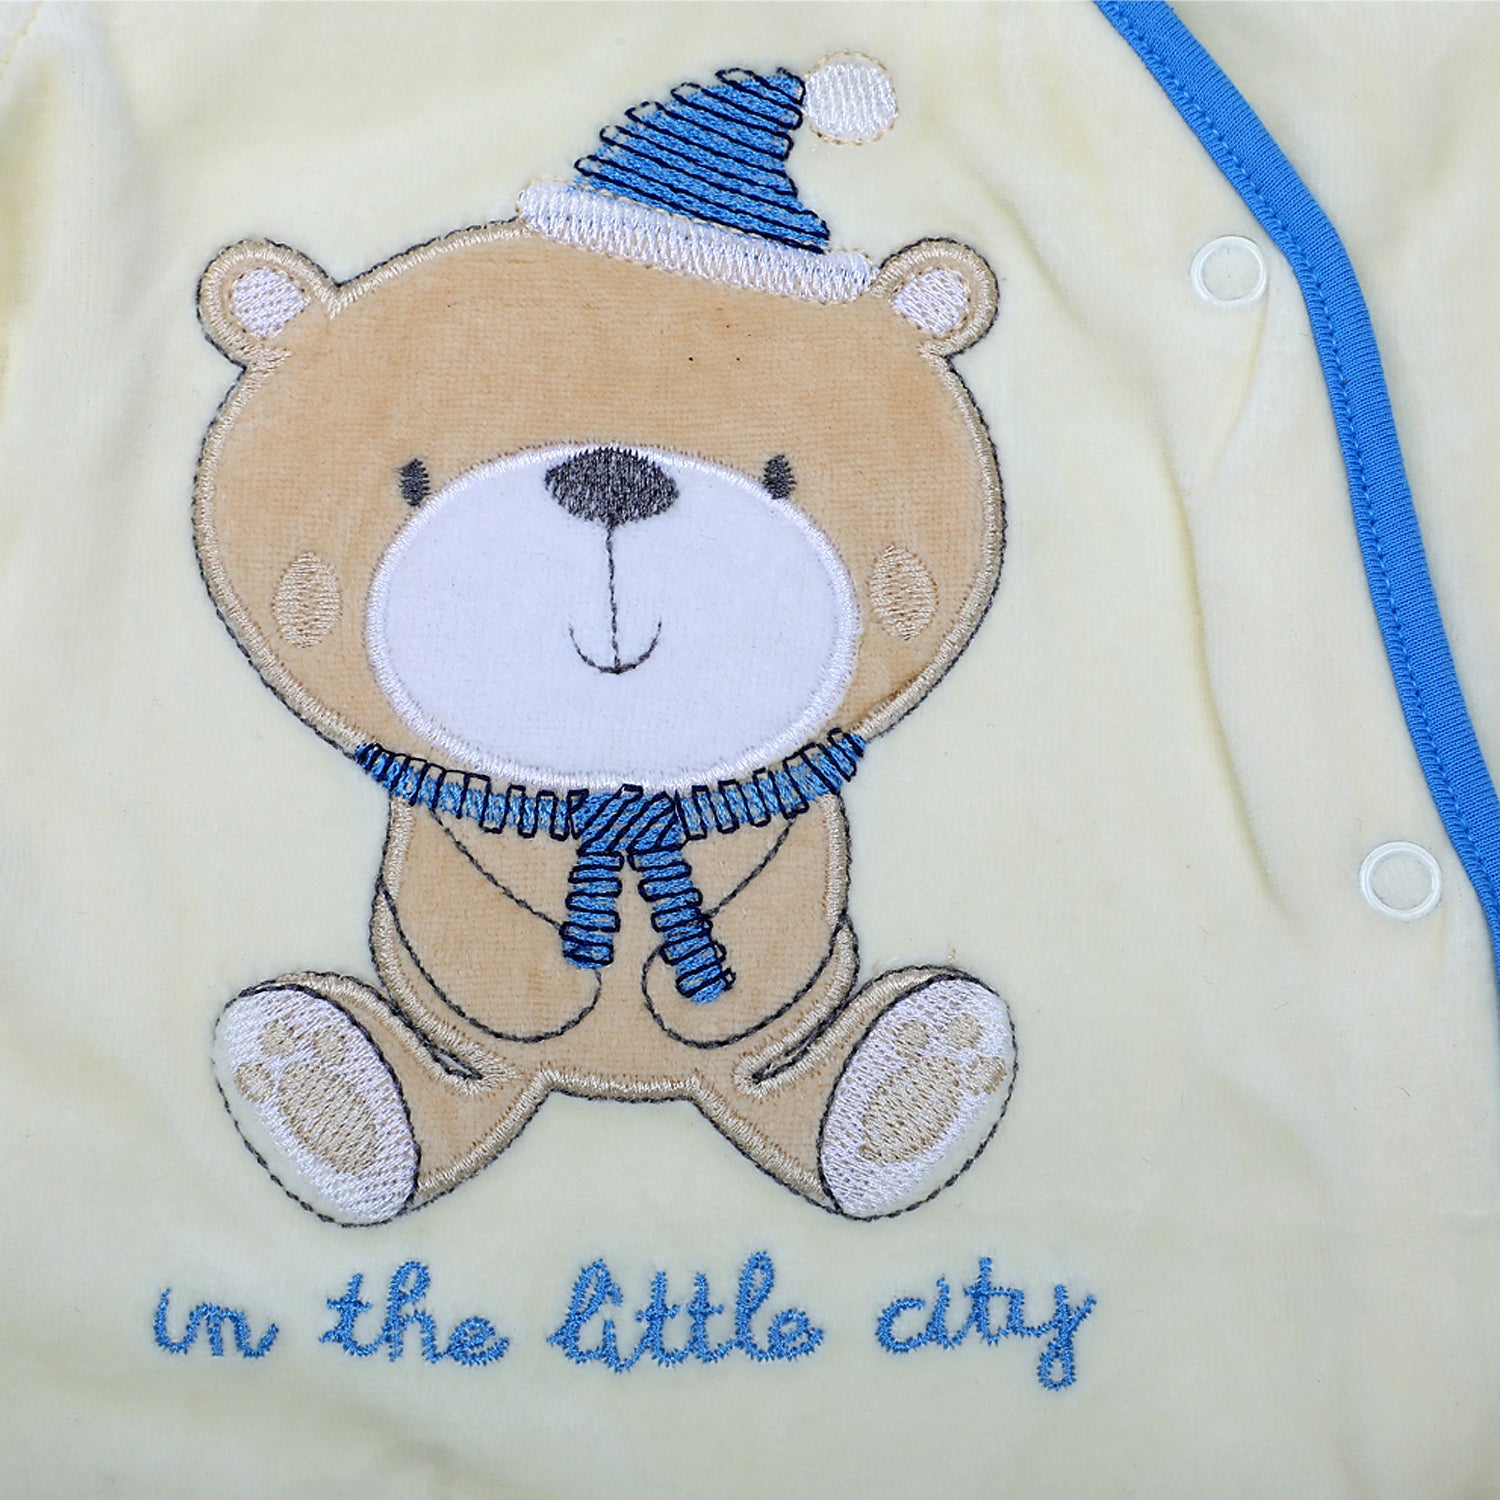 Bear In The City Infant Full Sleeves Snap Button Bodysuit Romper - Yellow